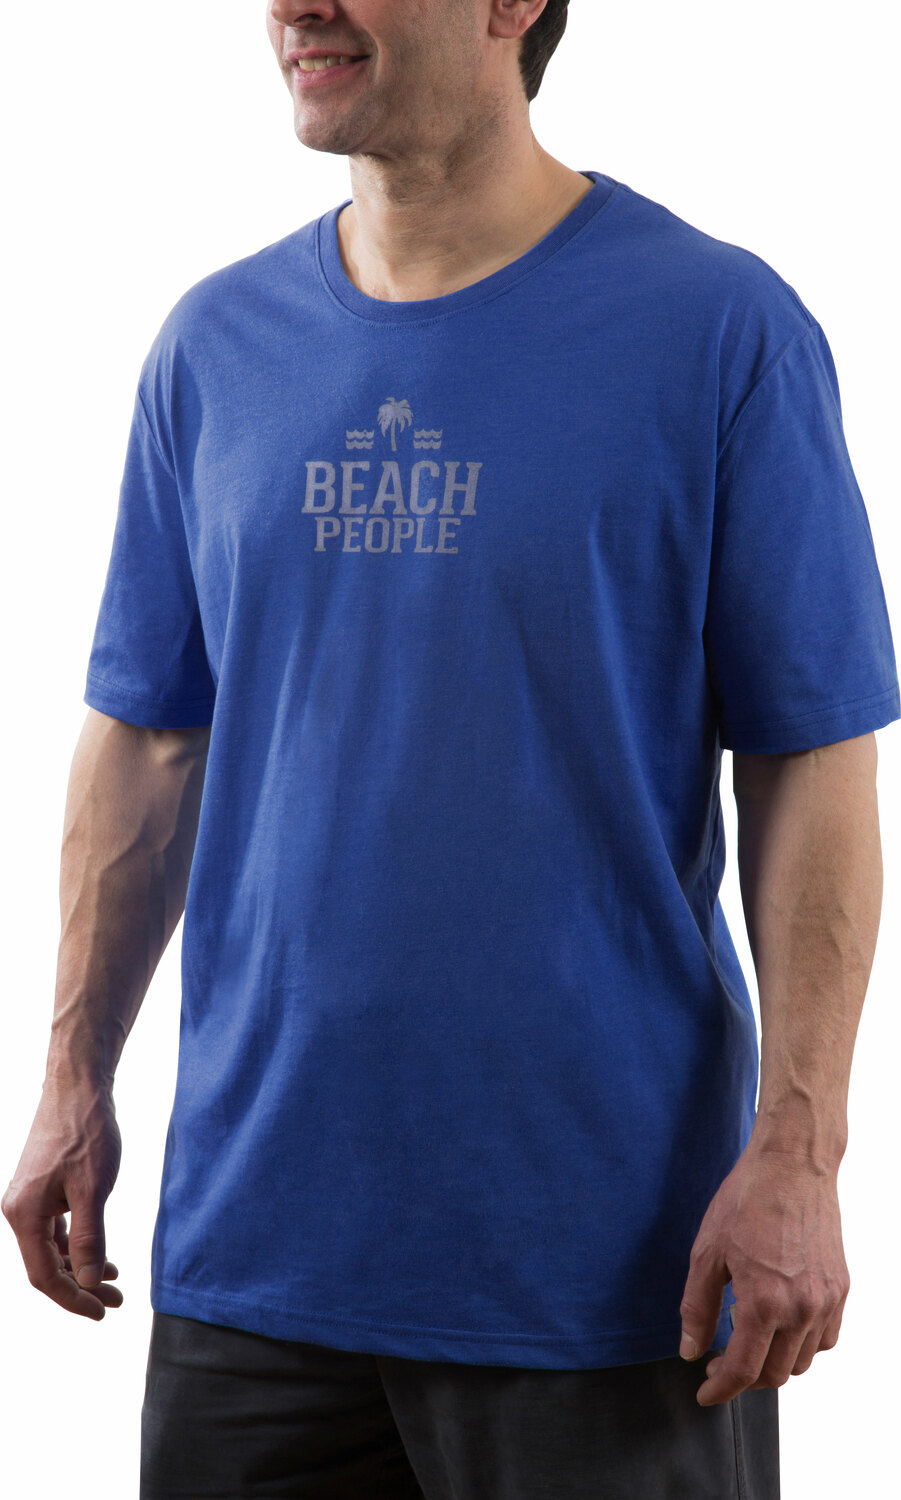 Beach People by We People - Beach People - Small Blue Unisex T-Shirt